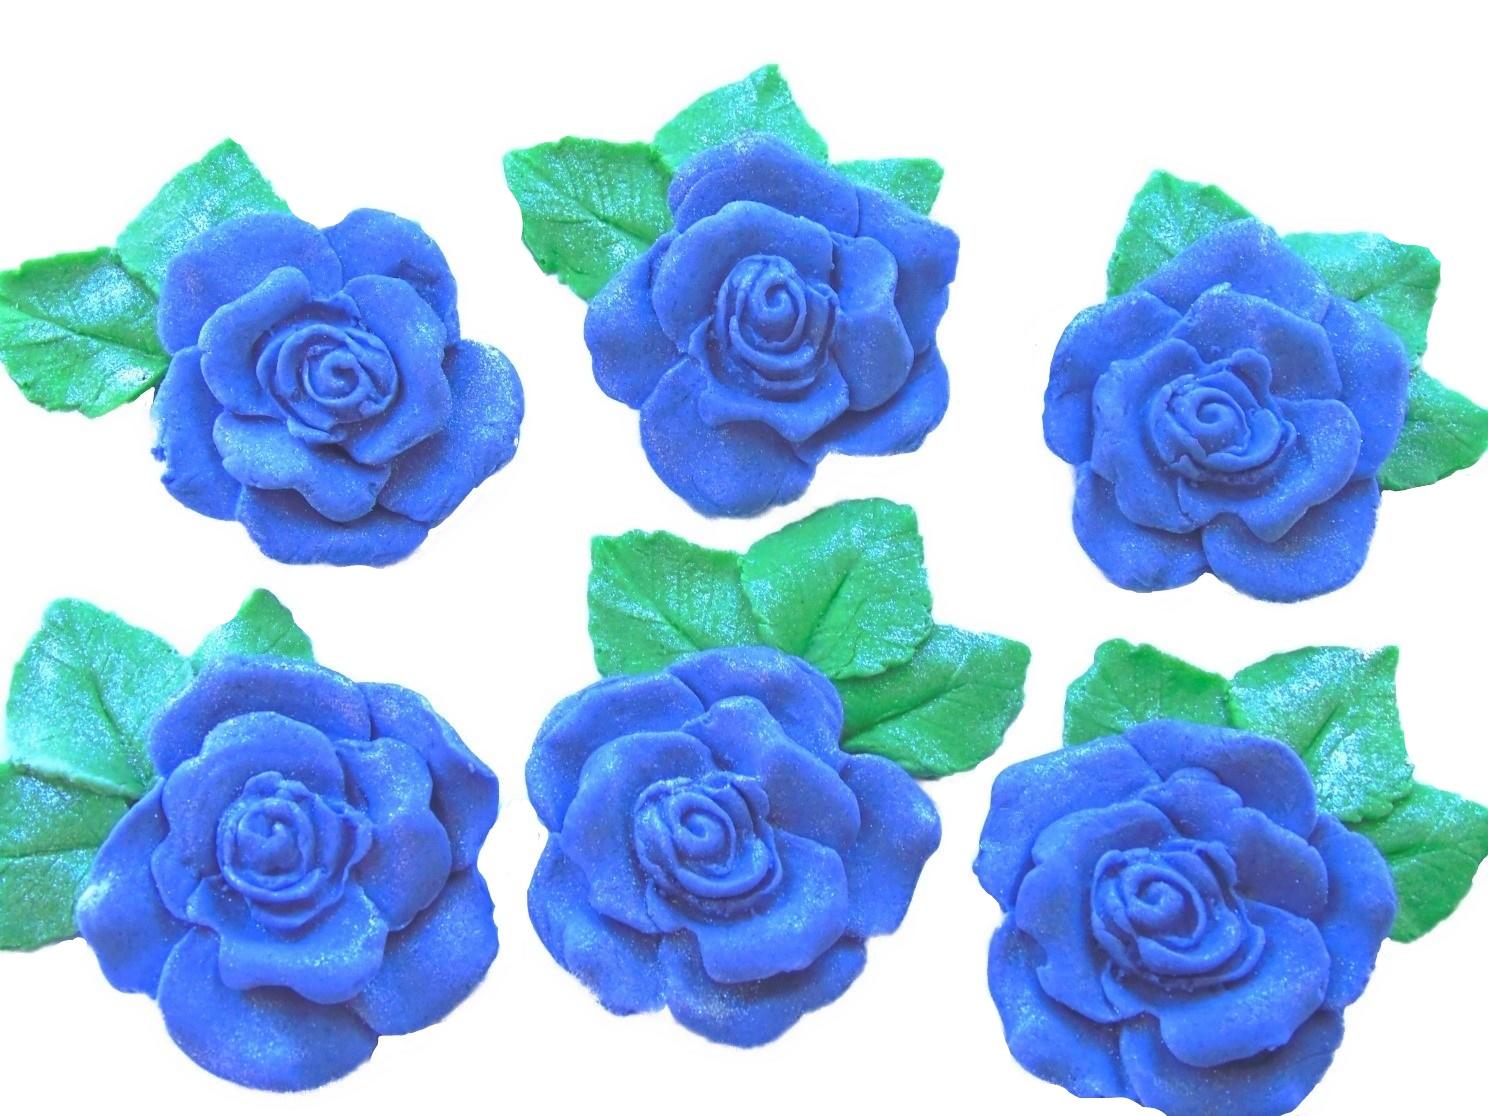 6 Large Blue Glittered Roses with leaves Vegan  Birthday Wedding Cake Toppers